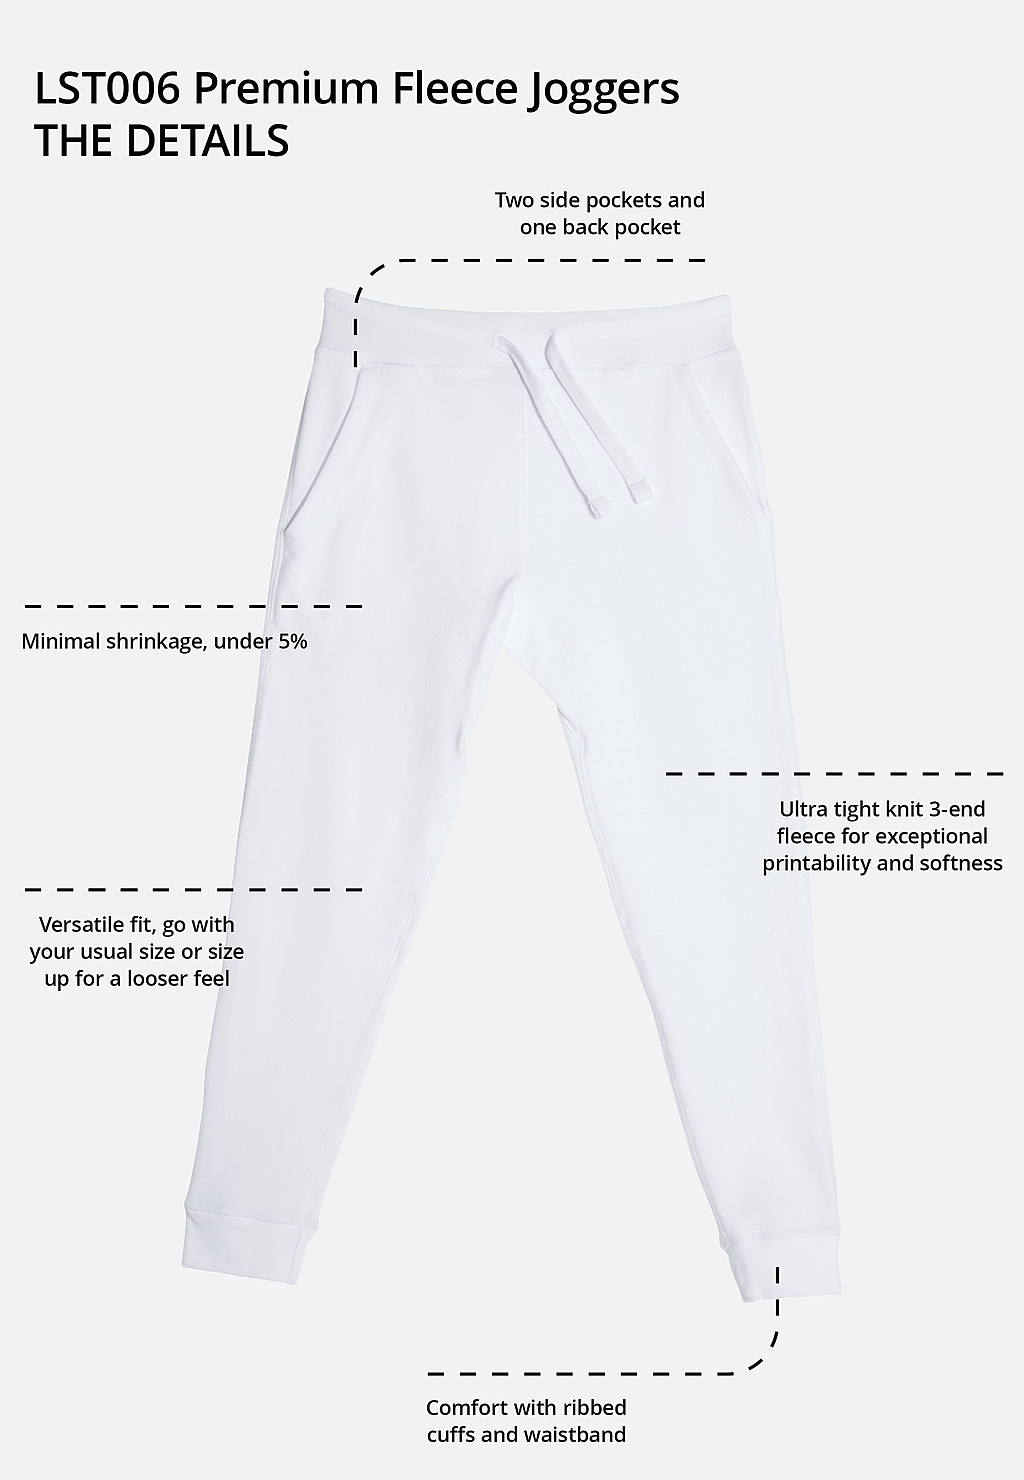 How To Make Joggers Tighter: Cuffs, Waistband, And Fit